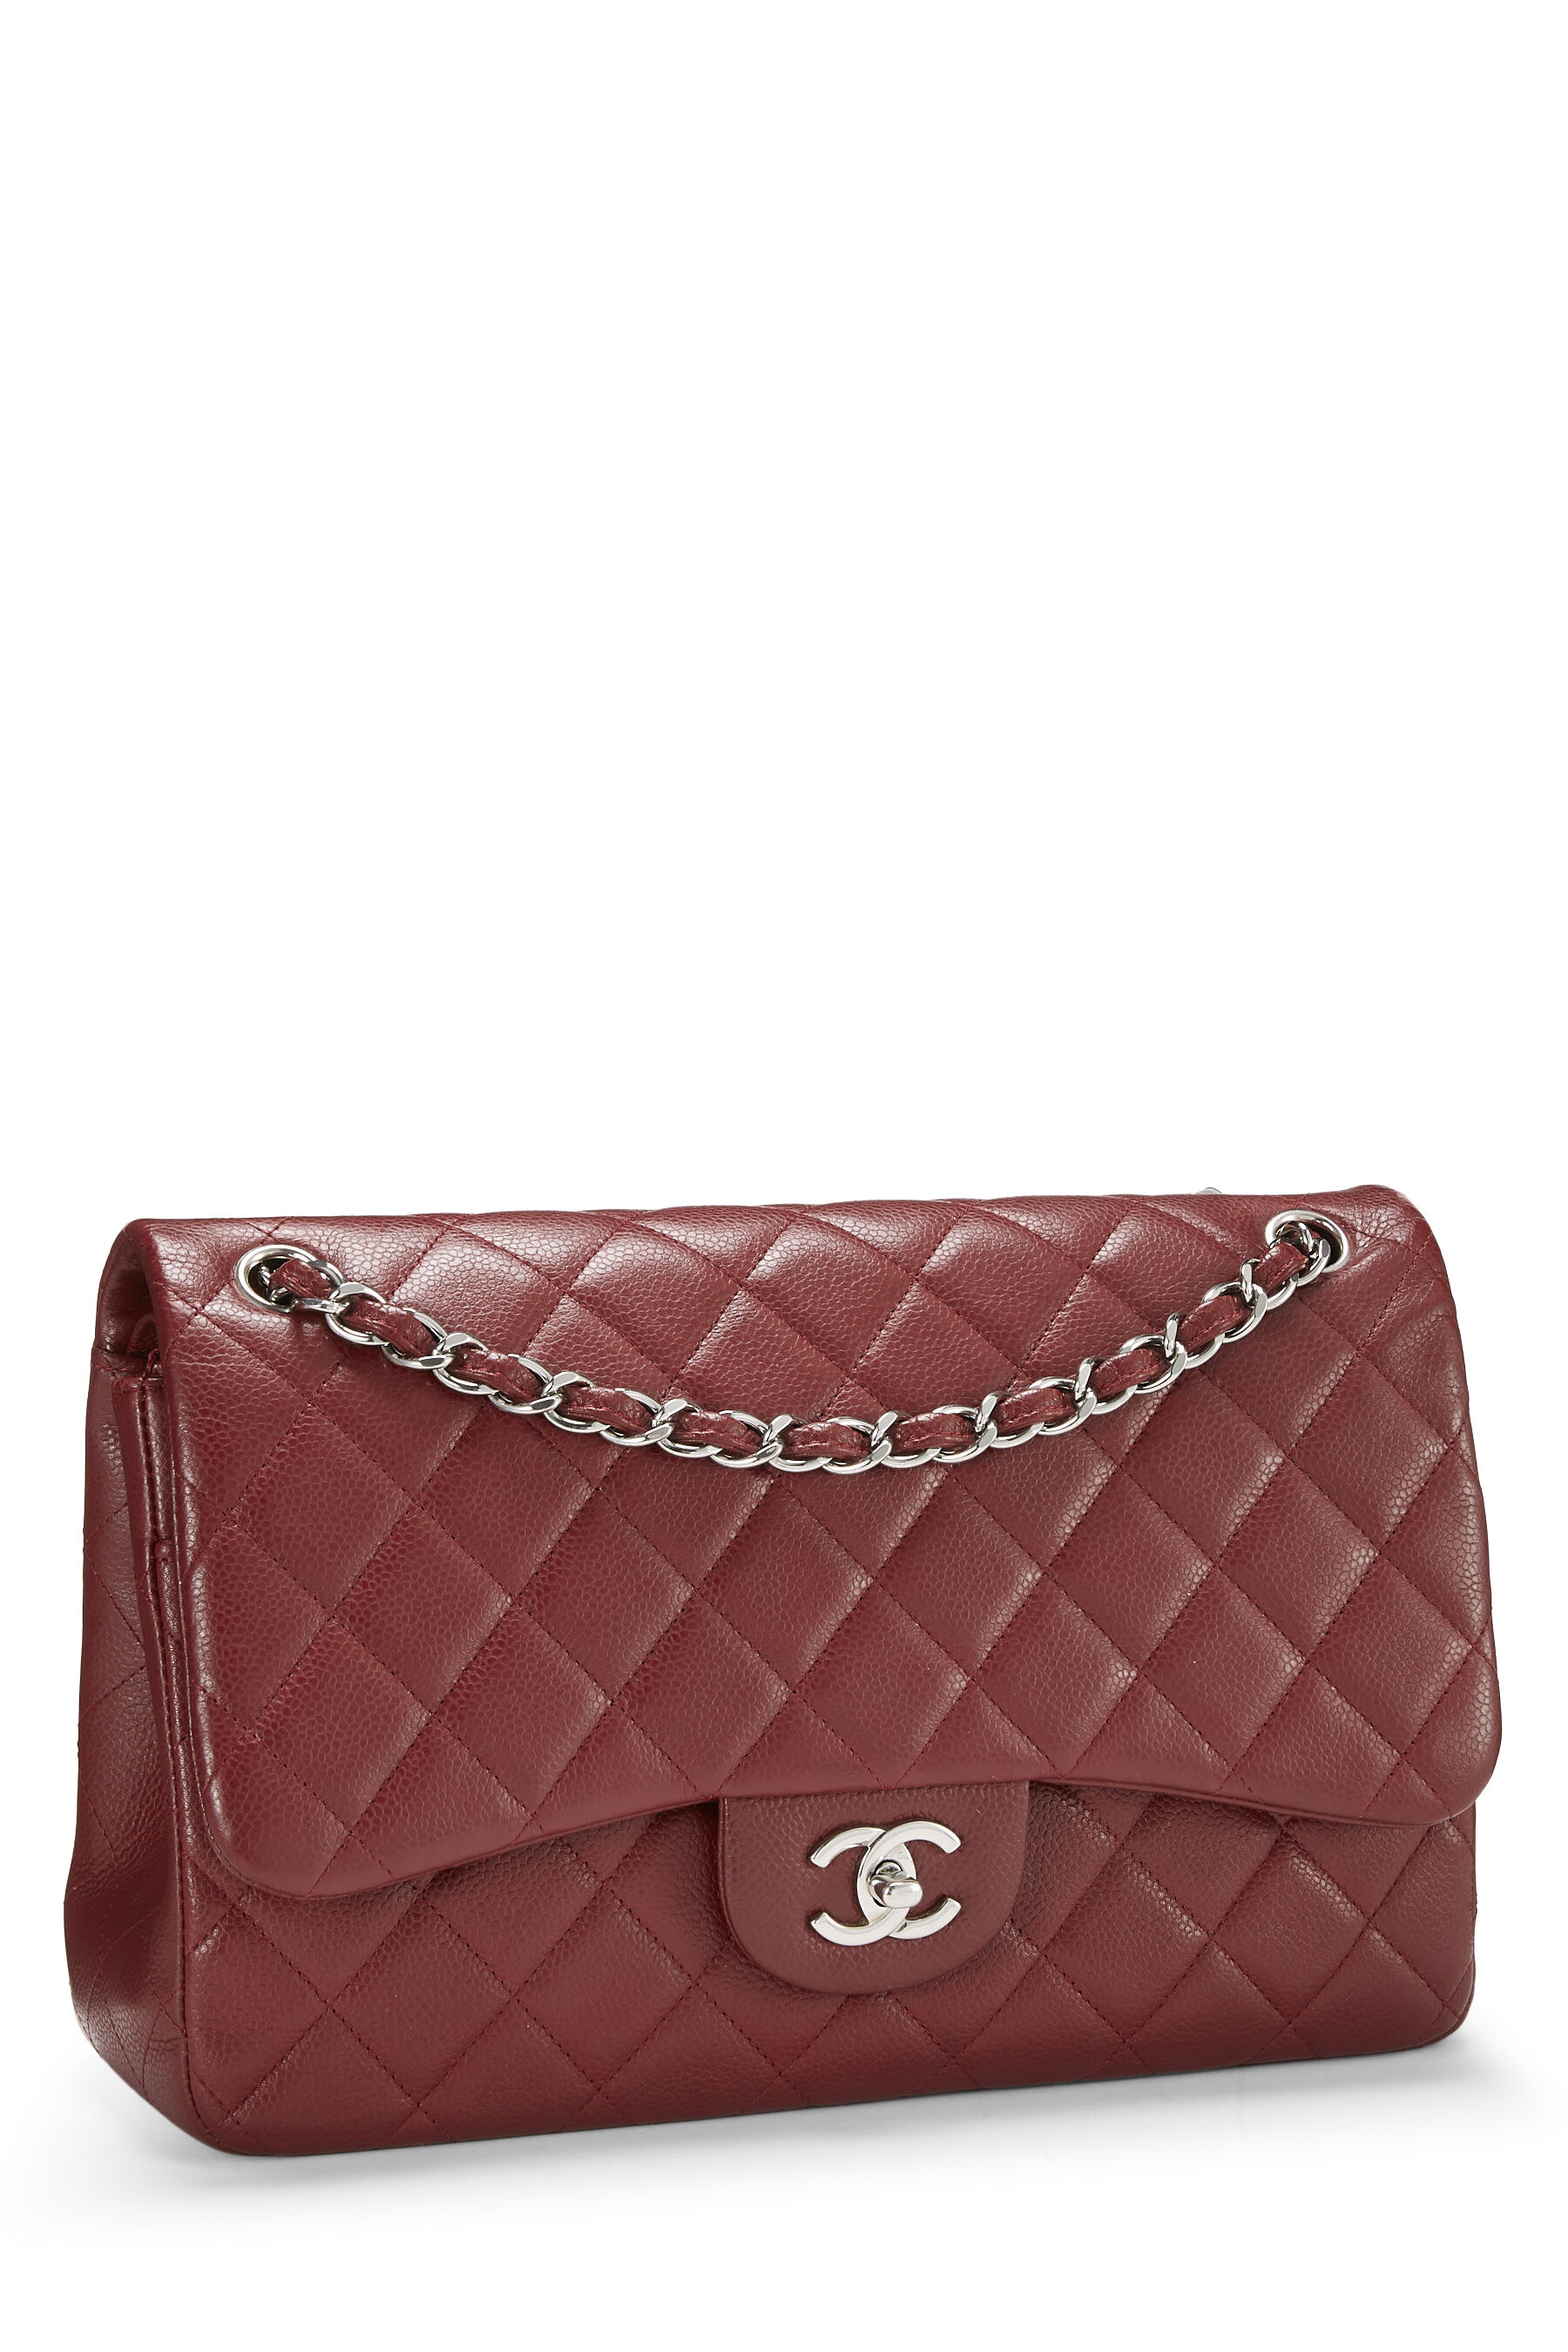 Shop authentic Chanel Classic Jumbo Single Flap Bag at revogue for just USD  320000